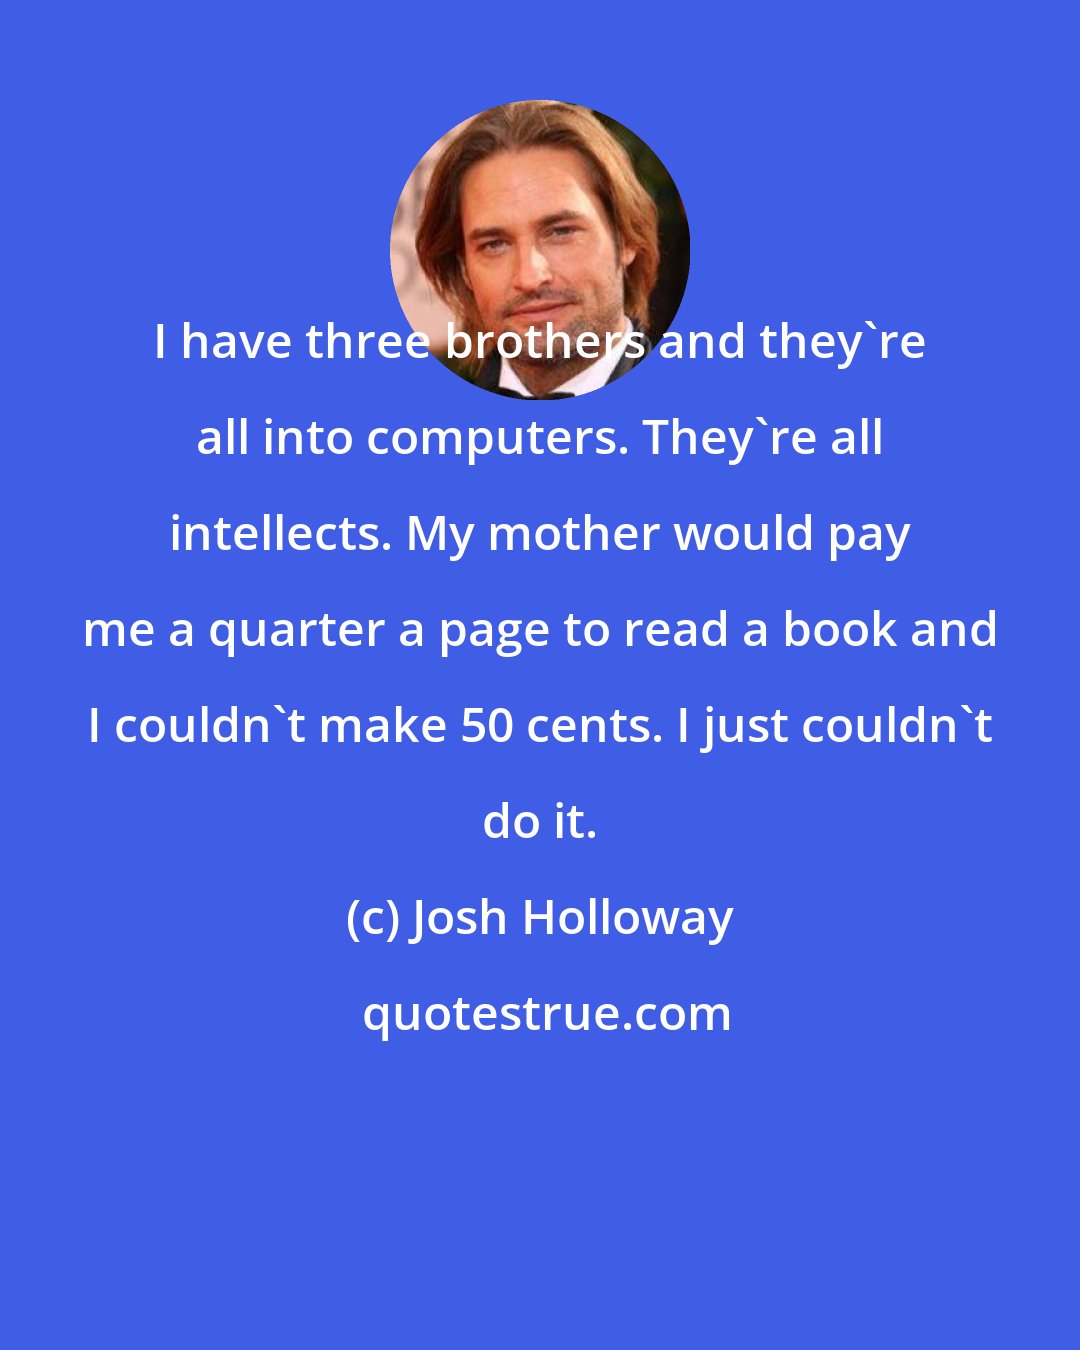 Josh Holloway: I have three brothers and they're all into computers. They're all intellects. My mother would pay me a quarter a page to read a book and I couldn't make 50 cents. I just couldn't do it.